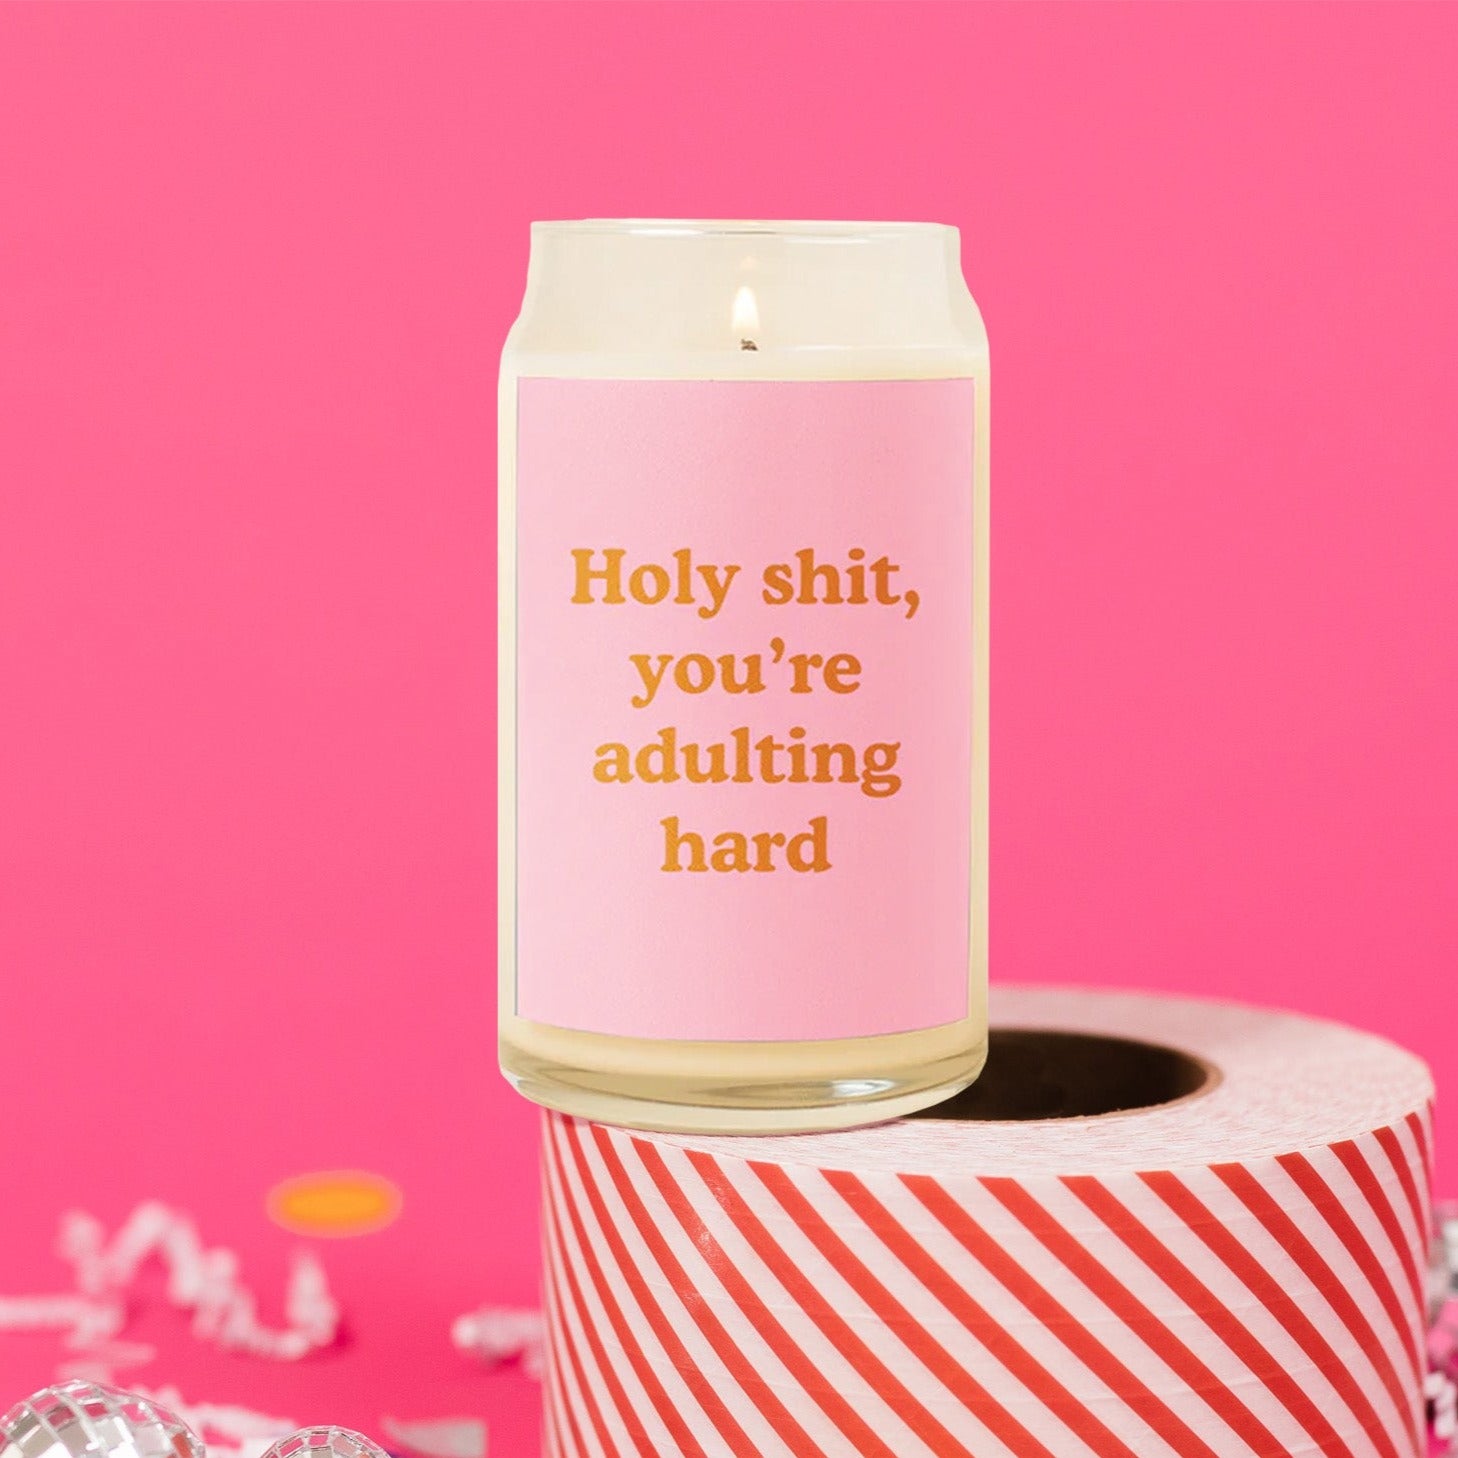 On a hot pink background sits a candle atop a roll of red and white striped packing tape. There are white crinkle and big, colorful confetti scattered around.. This beer can inspired glass candle is lit and has a bubblegum pink label on the front. It says "Holy shit, you're adulting hard" in a dark orange, thick serif font.